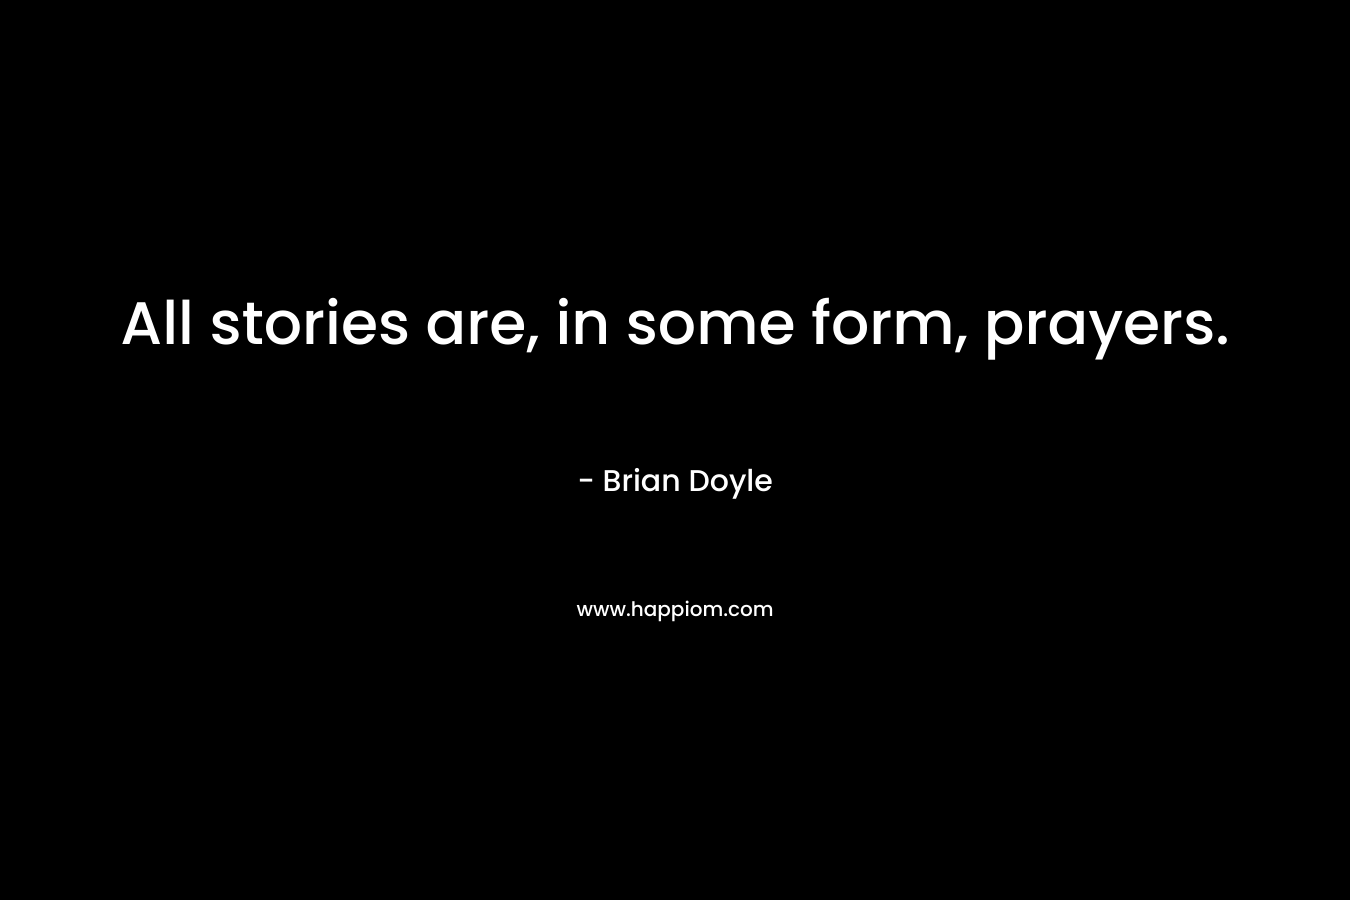 All stories are, in some form, prayers.